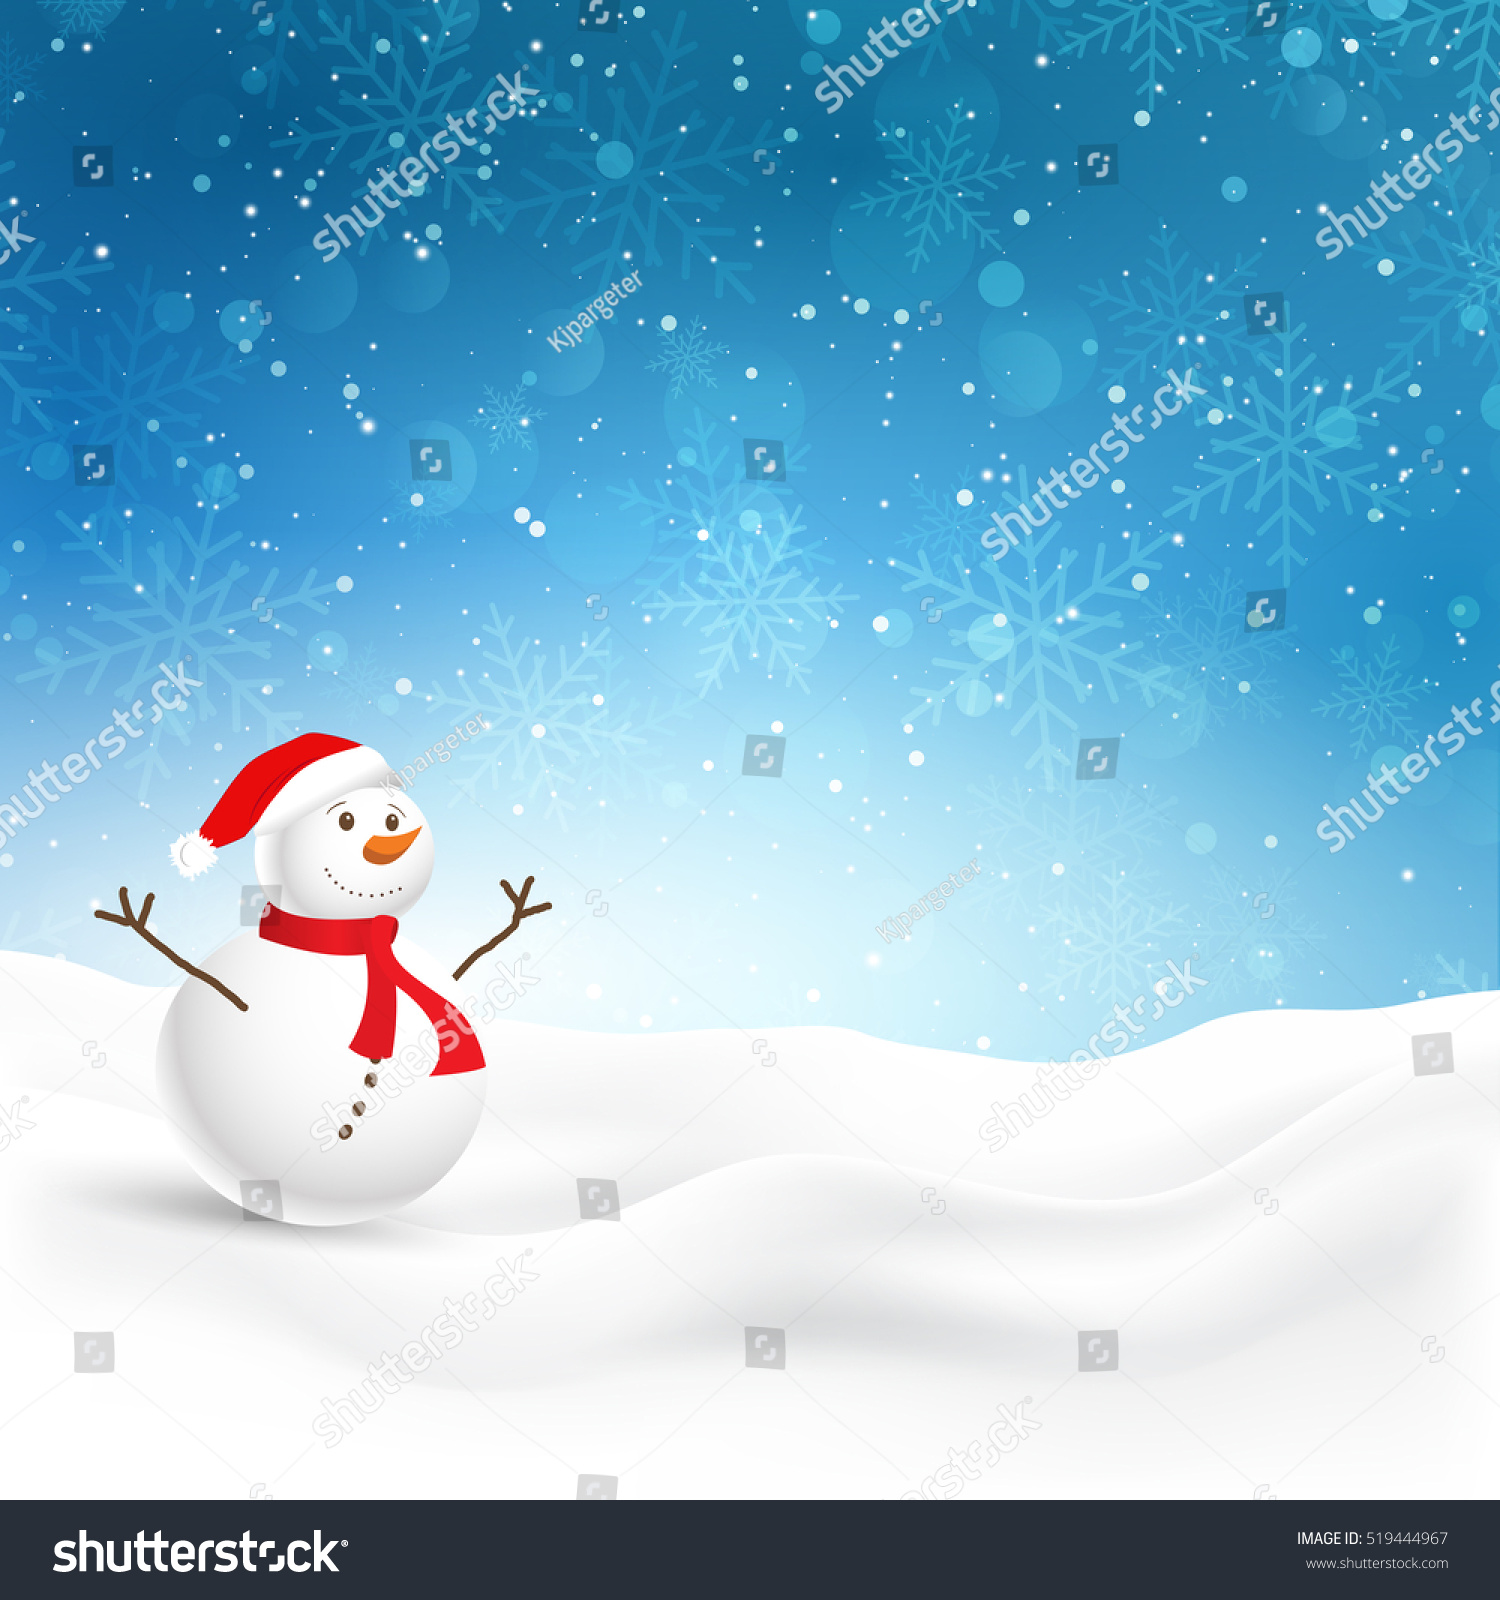 1,501,409 Cute winter background Images, Stock Photos & Vectors ...